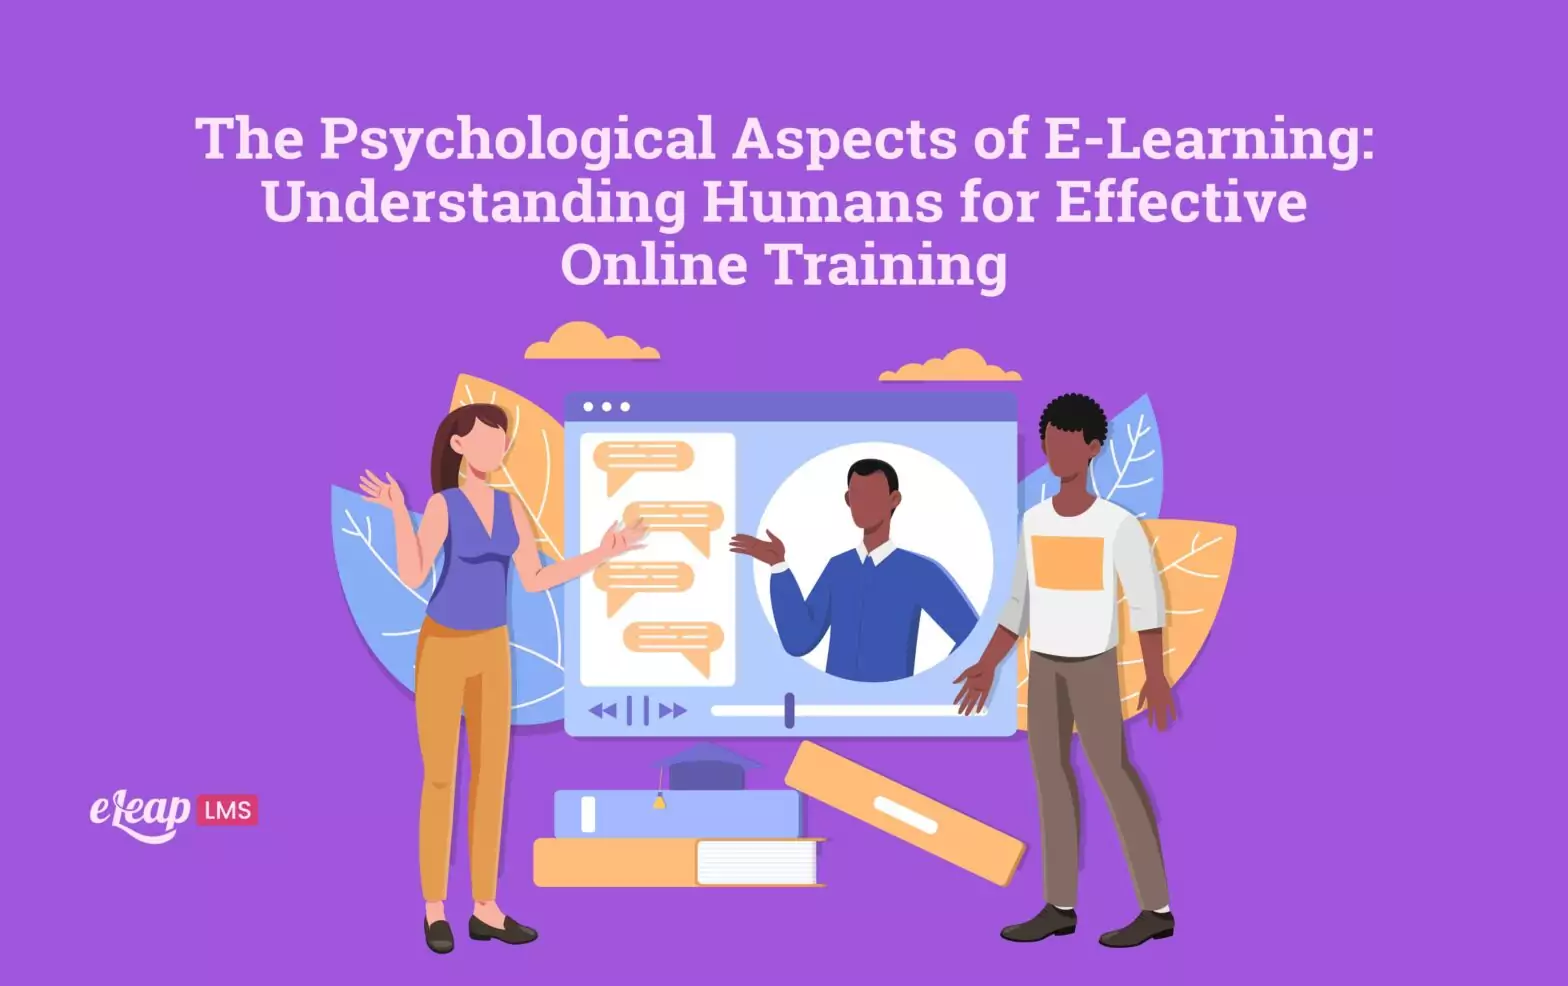 The Psychological Aspects of E-Learning: Understanding Humans for Effective Online Training